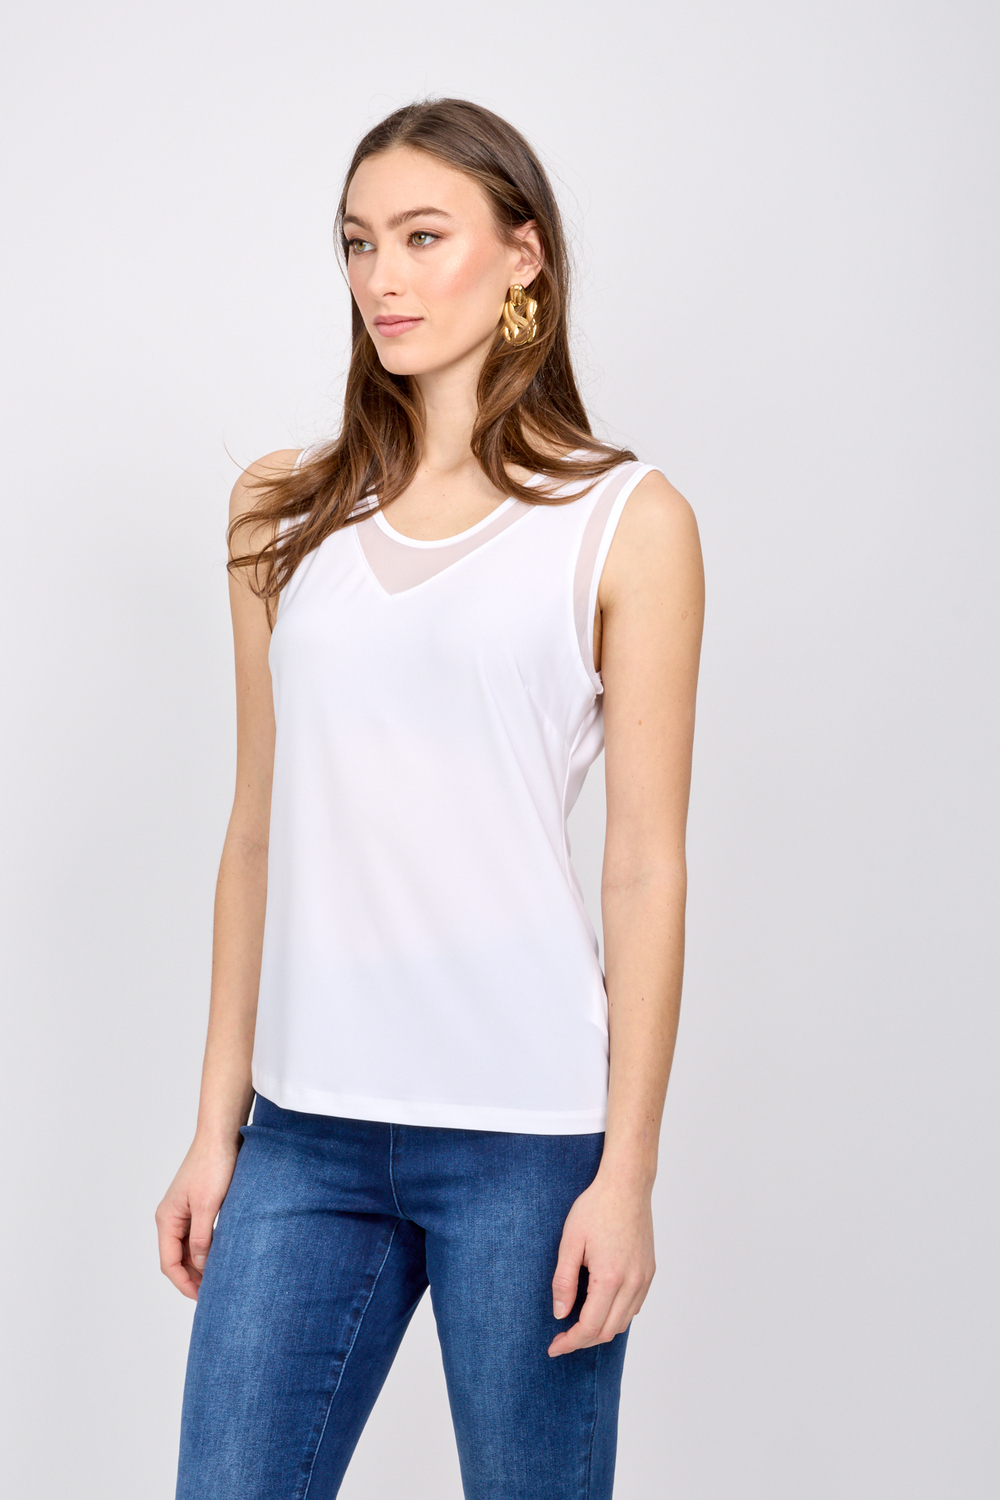 Sheer Collar Top Style 246031. Off White